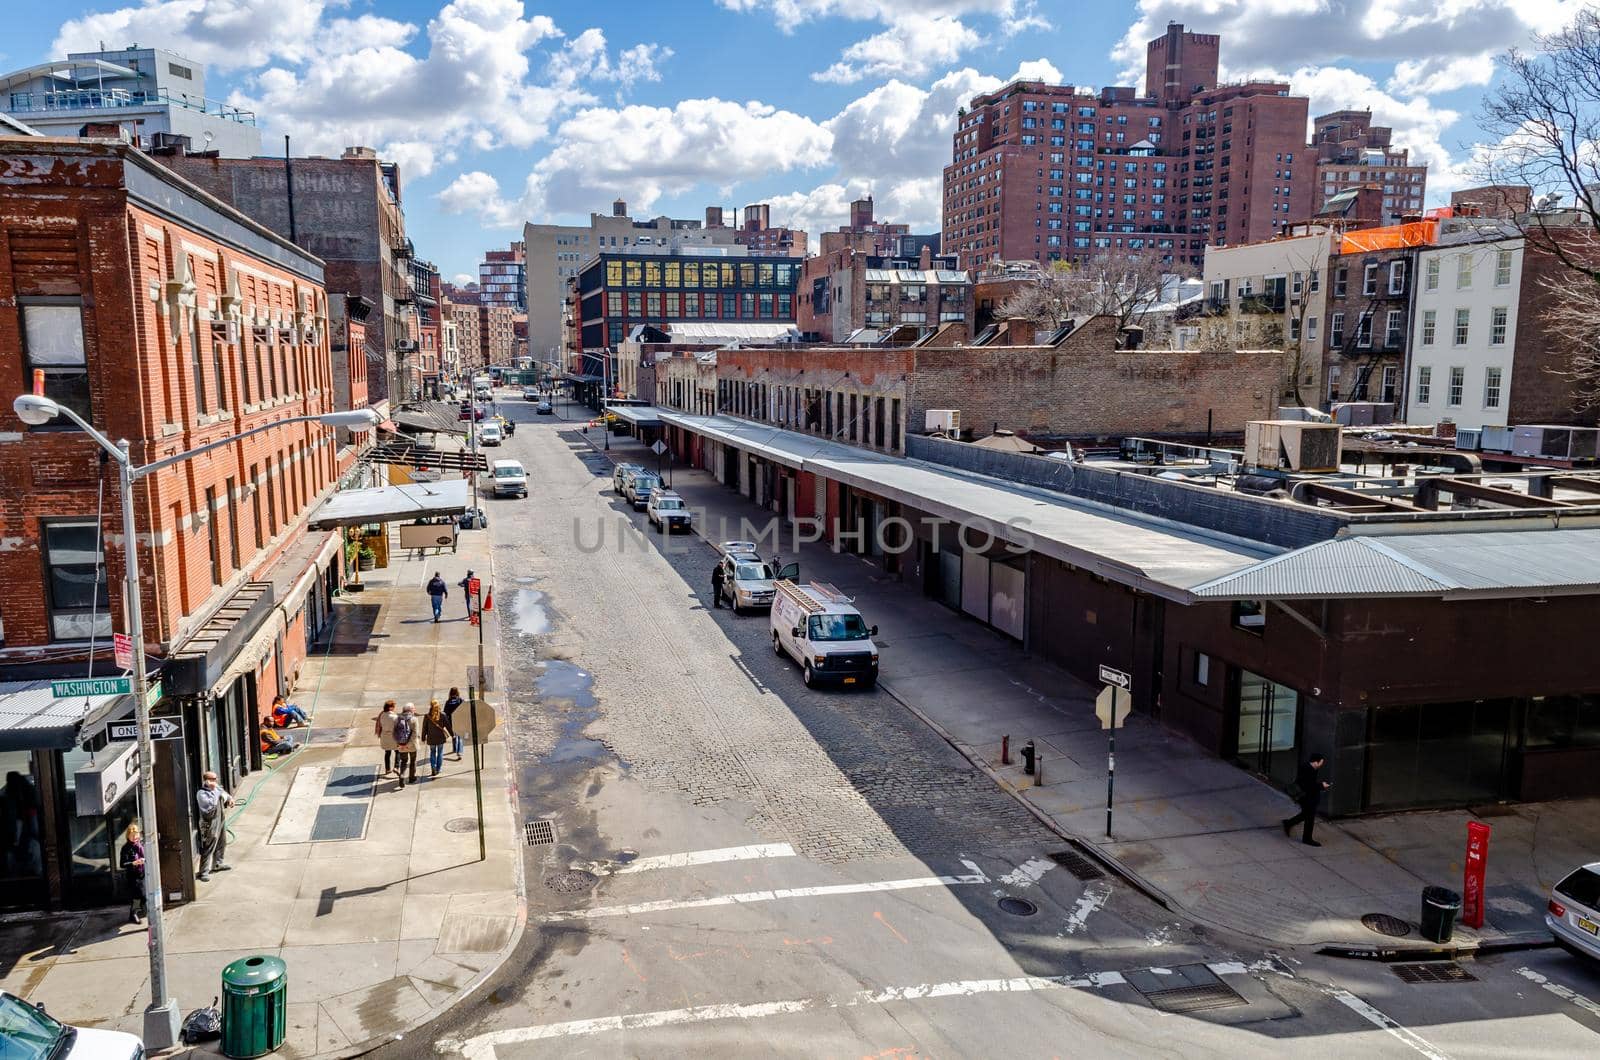 City Street in Chelsea, aerial view, New York City, view from the High Line Rooftop Park during sunny winter day, commercial buildings in the front and residential building in the background horizontal